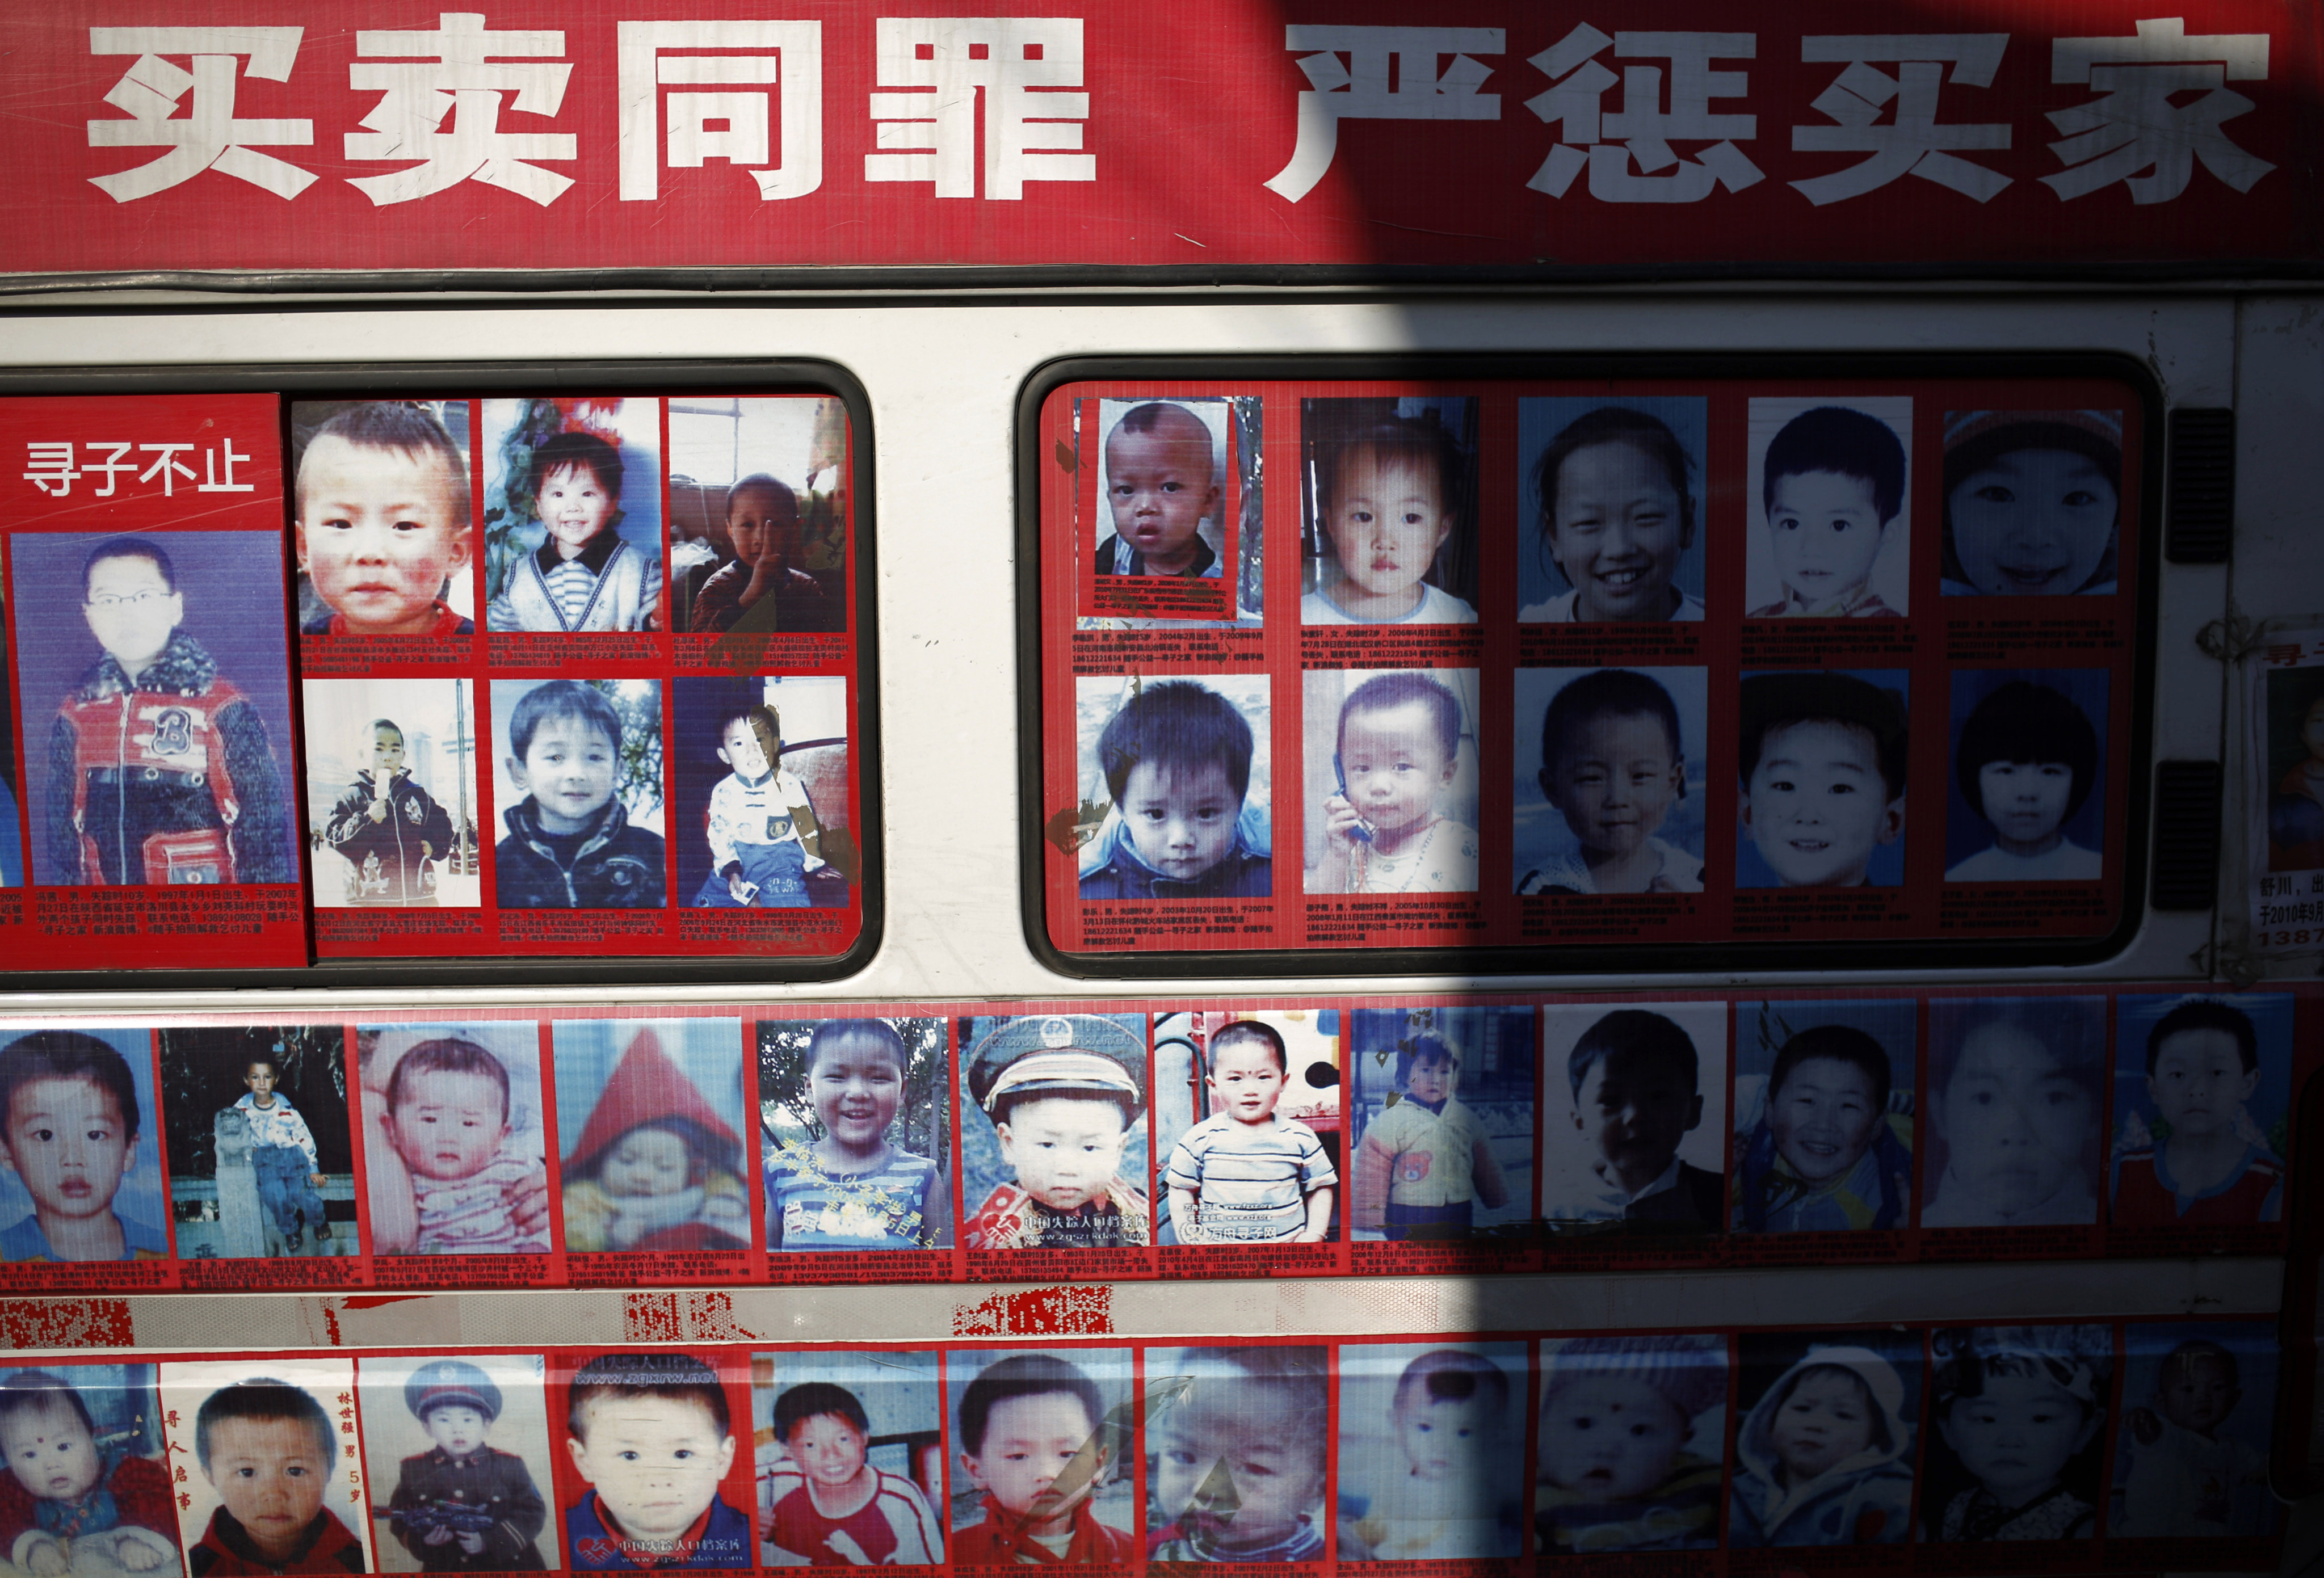 In China, from 2010 to 2019, the number of cases of trafficking in women and children nationwide totalled 112,703, according to China’s National Bureau of Statistics. Photo: AP Photo